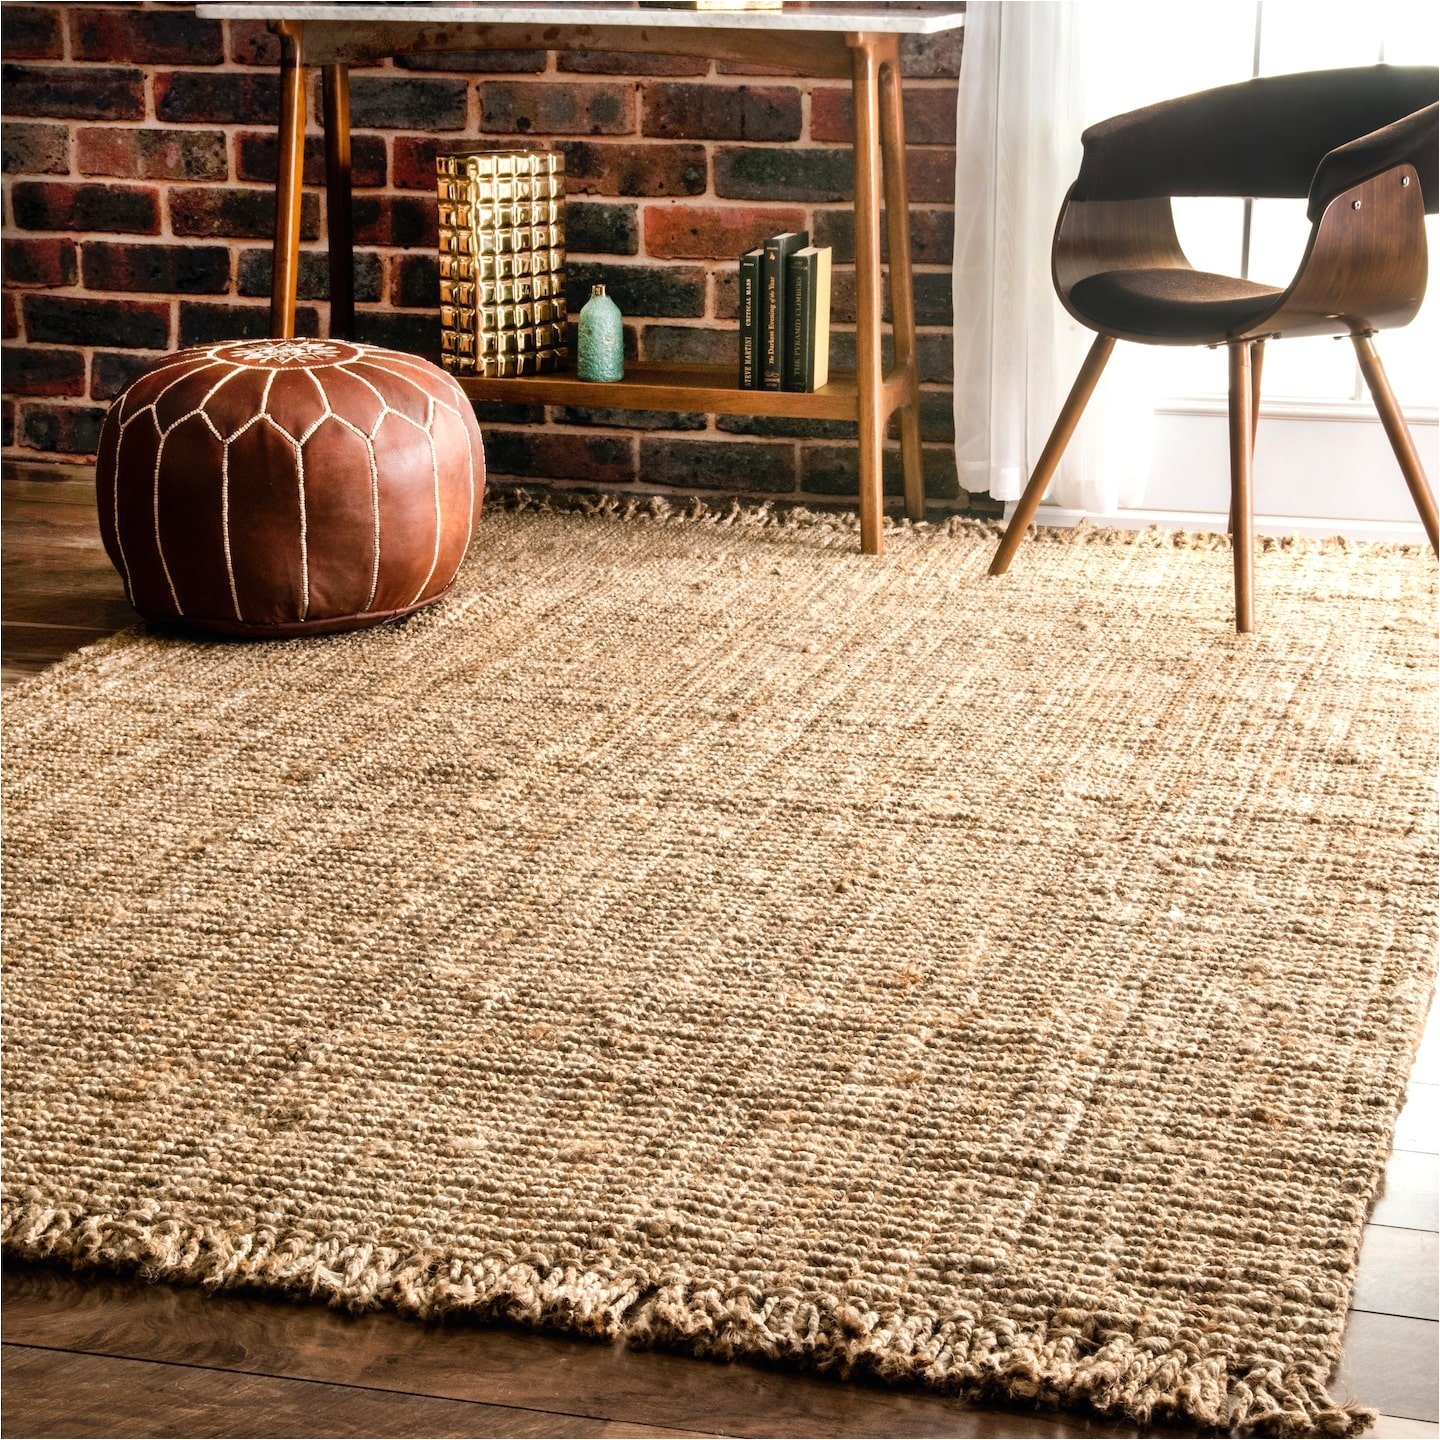 amazon com nuloom nccl01 natura collection chunky loop jute casuals natural fibers hand woven area rug 7 6 x 9 6 beige kitchen dining